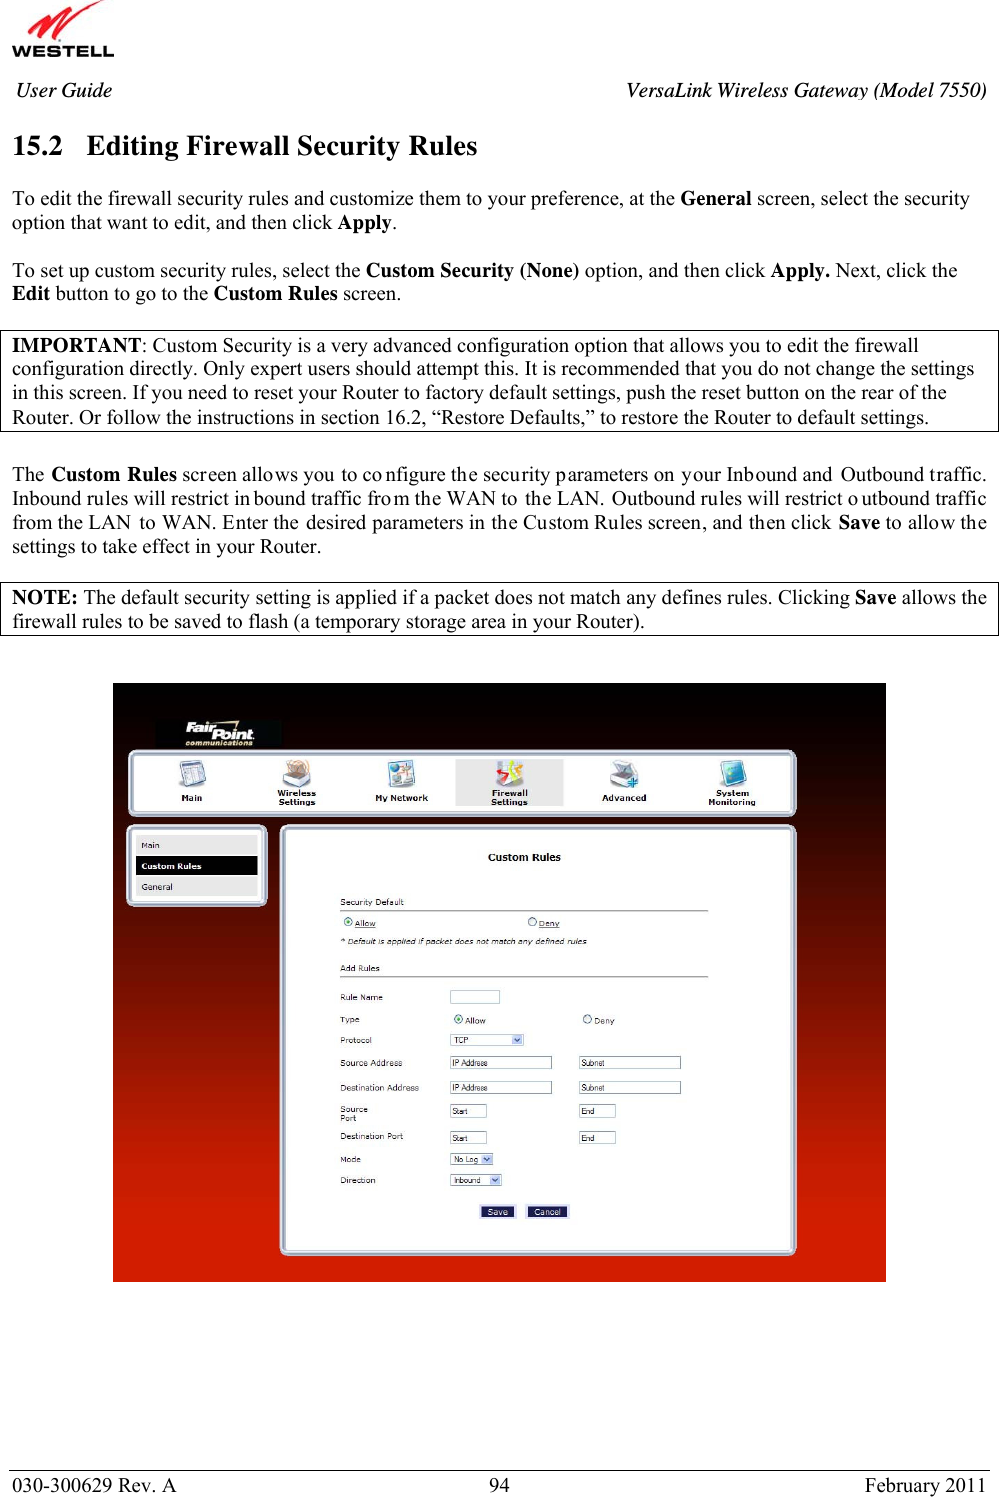       030-300629 Rev. A  94       February 2011 User Guide  VersaLink Wireless Gateway (Model 7550) 15.2   Editing Firewall Security Rules  To edit the firewall security rules and customize them to your preference, at the General screen, select the security option that want to edit, and then click Apply.  To set up custom security rules, select the Custom Security (None) option, and then click Apply. Next, click the Edit button to go to the Custom Rules screen.  IMPORTANT: Custom Security is a very advanced configuration option that allows you to edit the firewall configuration directly. Only expert users should attempt this. It is recommended that you do not change the settings in this screen. If you need to reset your Router to factory default settings, push the reset button on the rear of the Router. Or follow the instructions in section 16.2, “Restore Defaults,” to restore the Router to default settings.   The Custom Rules screen allows you to co nfigure the security parameters on your Inbound and Outbound traffic. Inbound rules will restrict in bound traffic fro m the WAN to the LAN. Outbound rules will restrict o utbound traffic from the LAN to WAN. Enter the desired parameters in the Custom Rules screen, and then click Save to allow the settings to take effect in your Router.   NOTE: The default security setting is applied if a packet does not match any defines rules. Clicking Save allows the firewall rules to be saved to flash (a temporary storage area in your Router).            